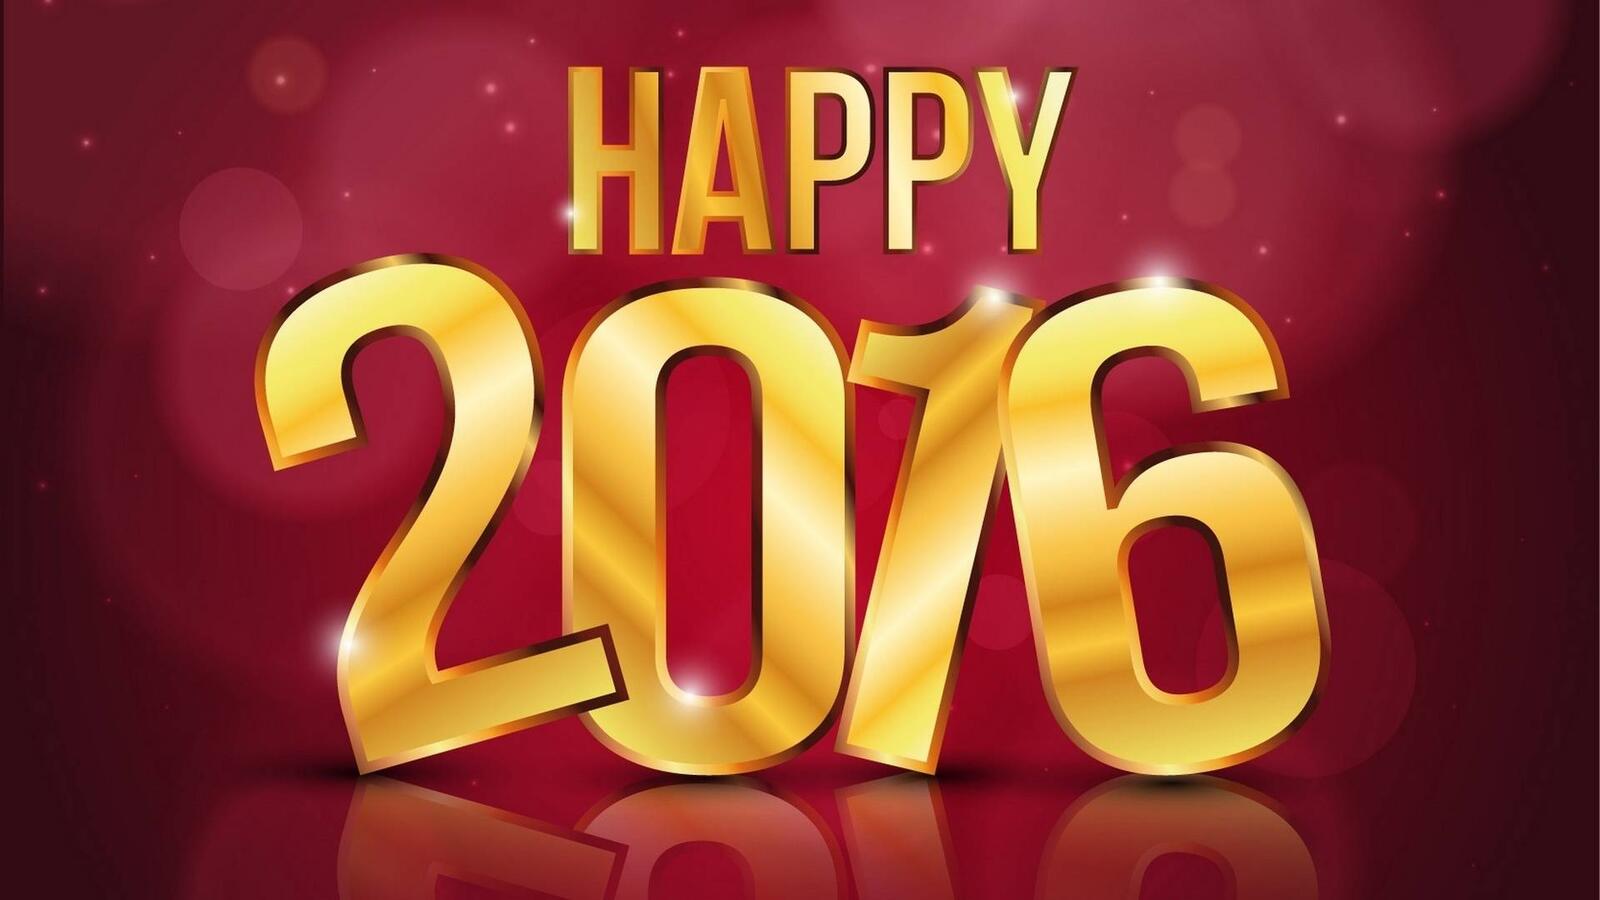 Wallpapers happy 2016 happy new year on the desktop